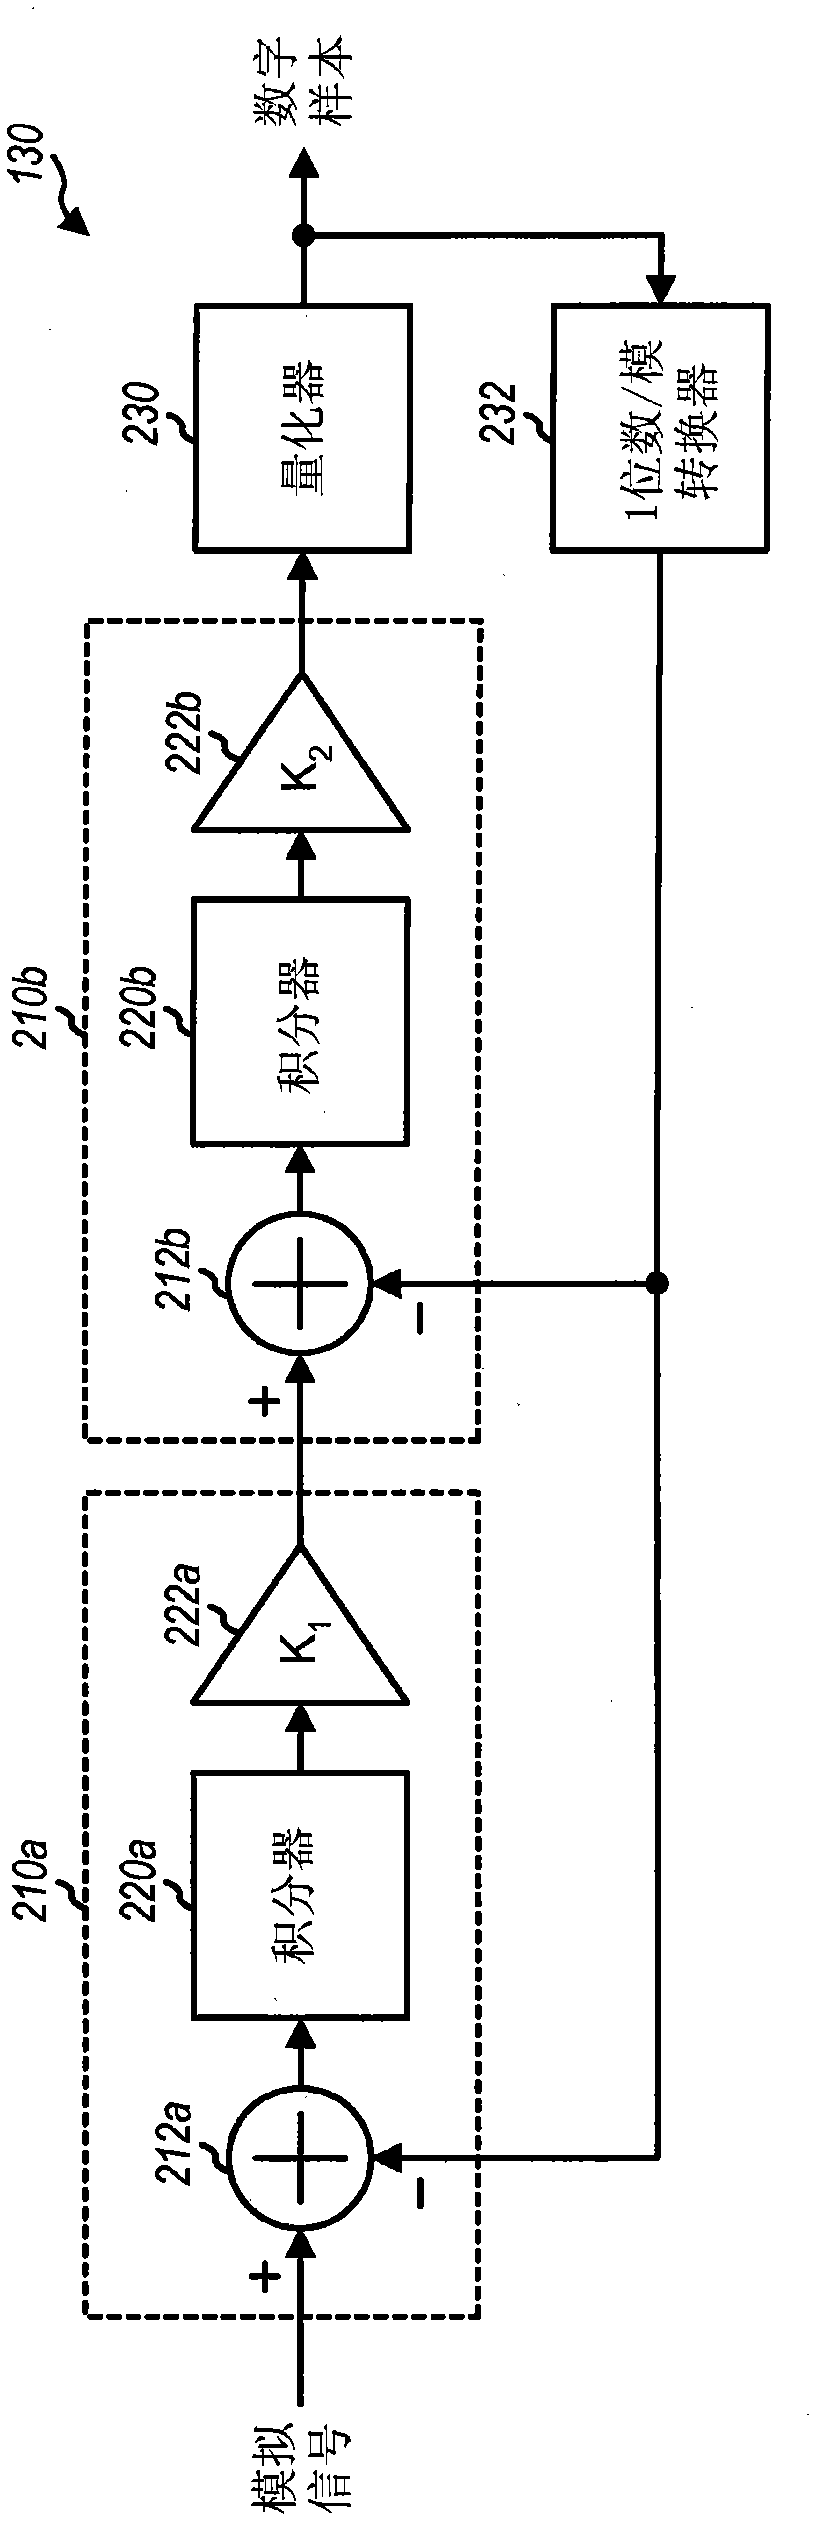 Adaptive bias current generation for switched-capacitor circuits